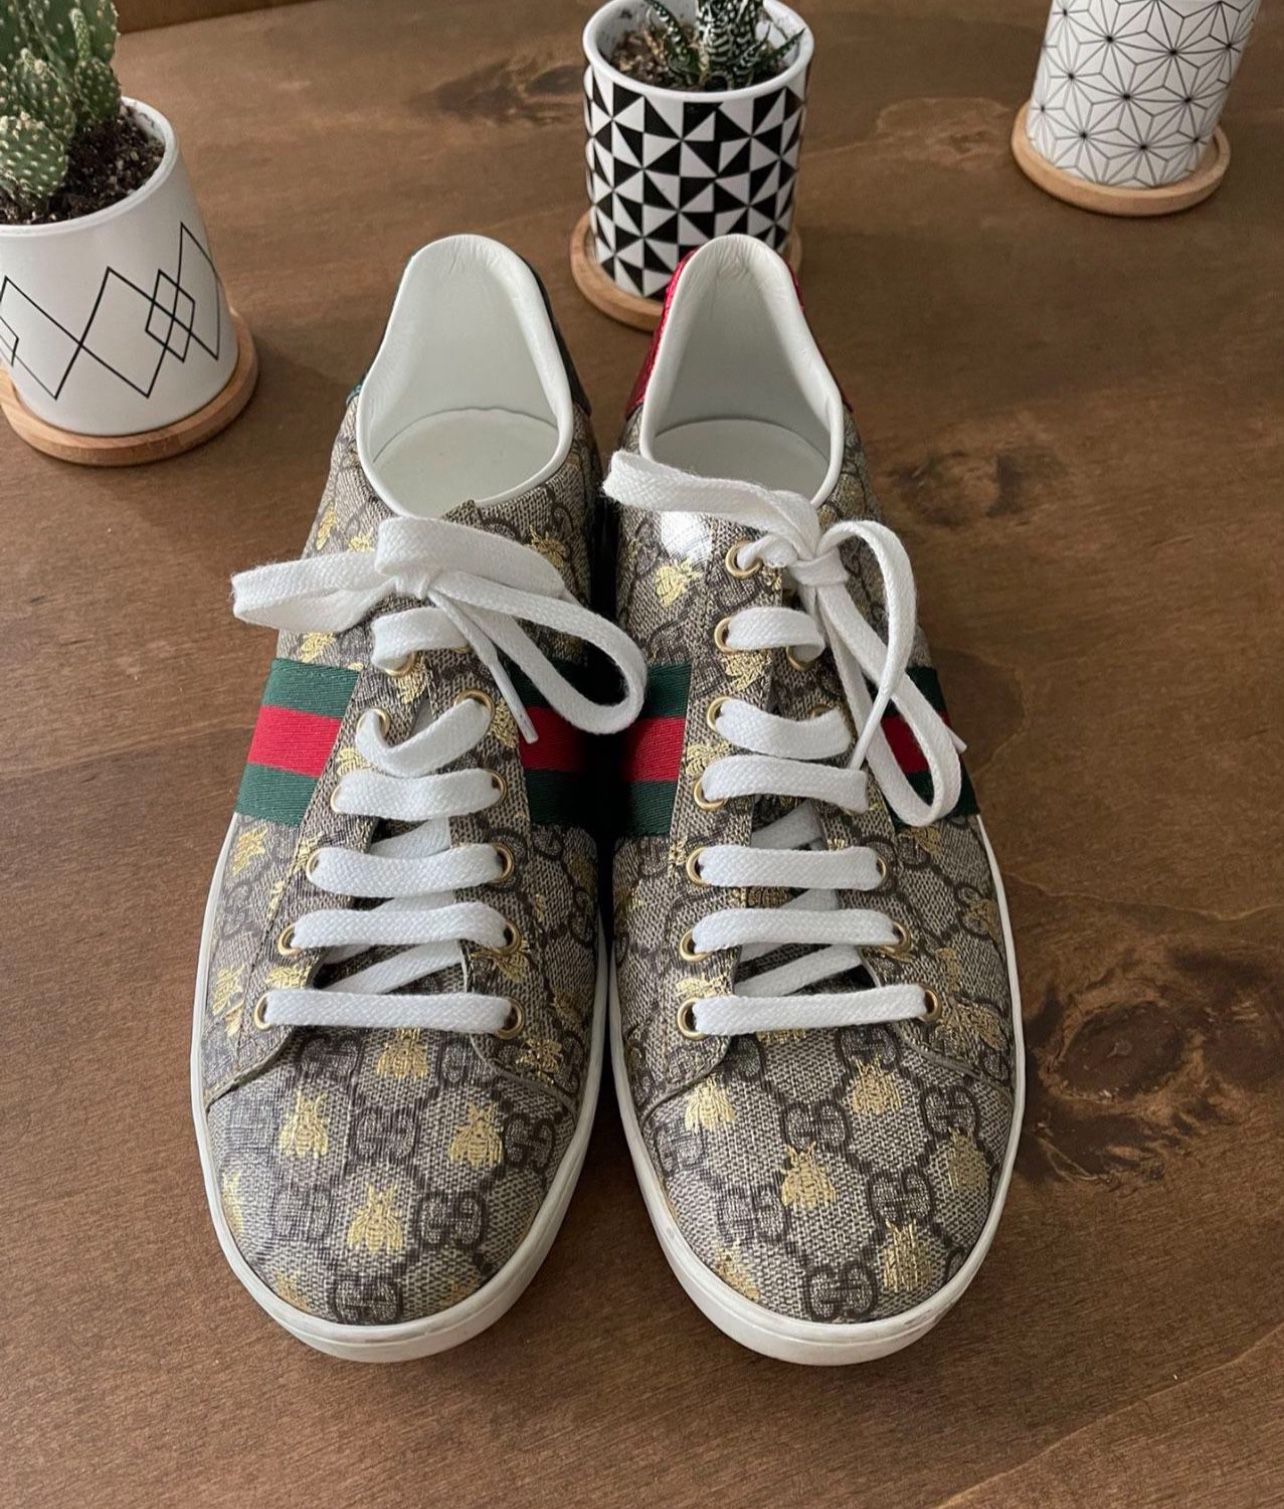 Gucci Ace Supreme Bee Women Shoes 